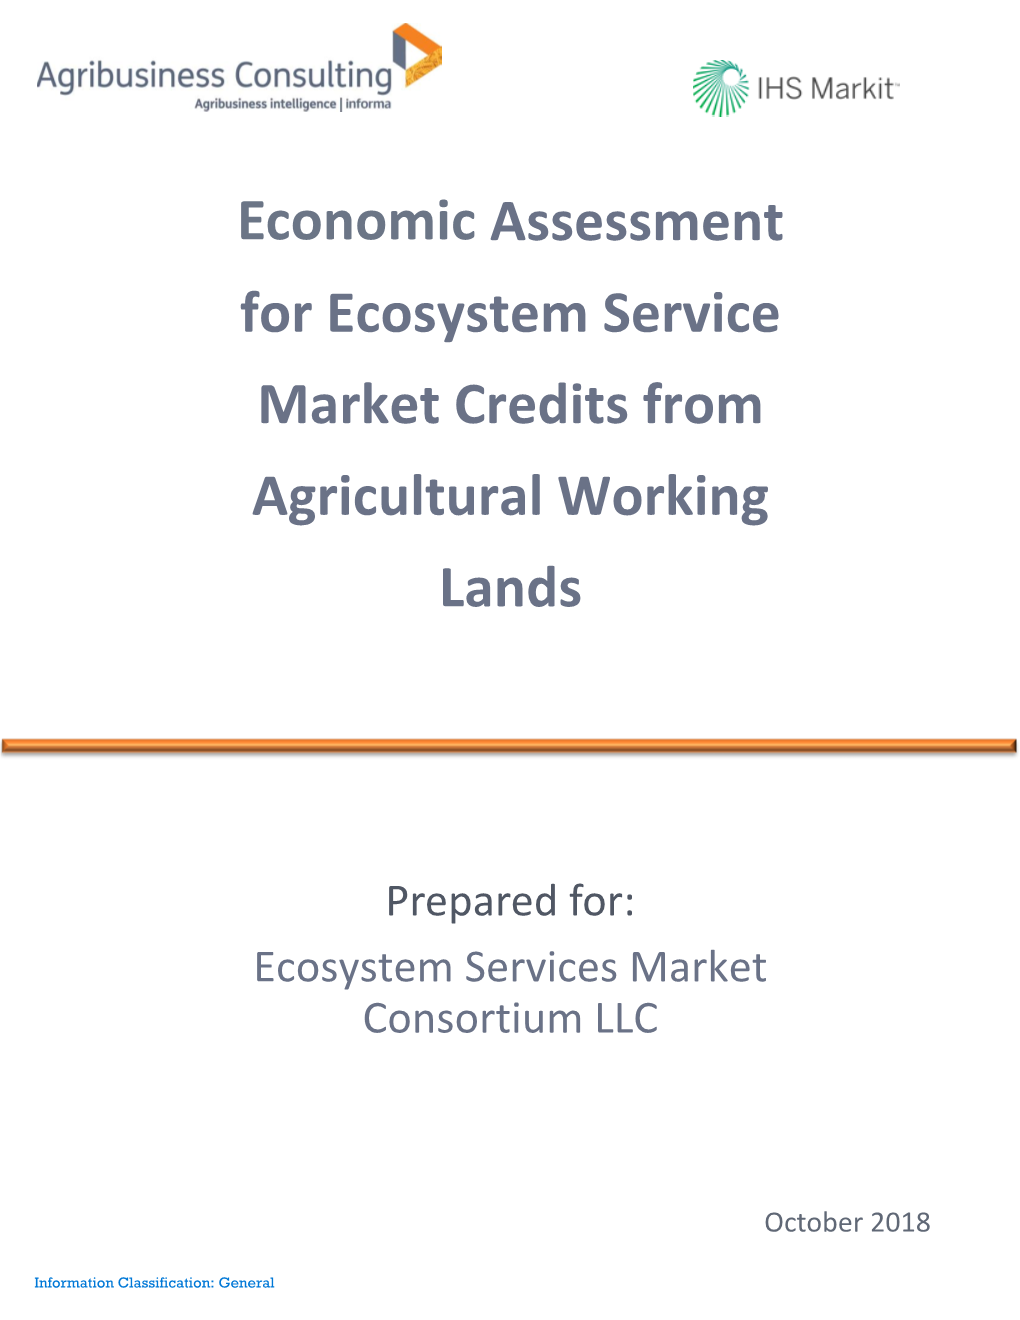 Economic Assessment for Ecosystem Service Market Credits from Agricultural Working Lands